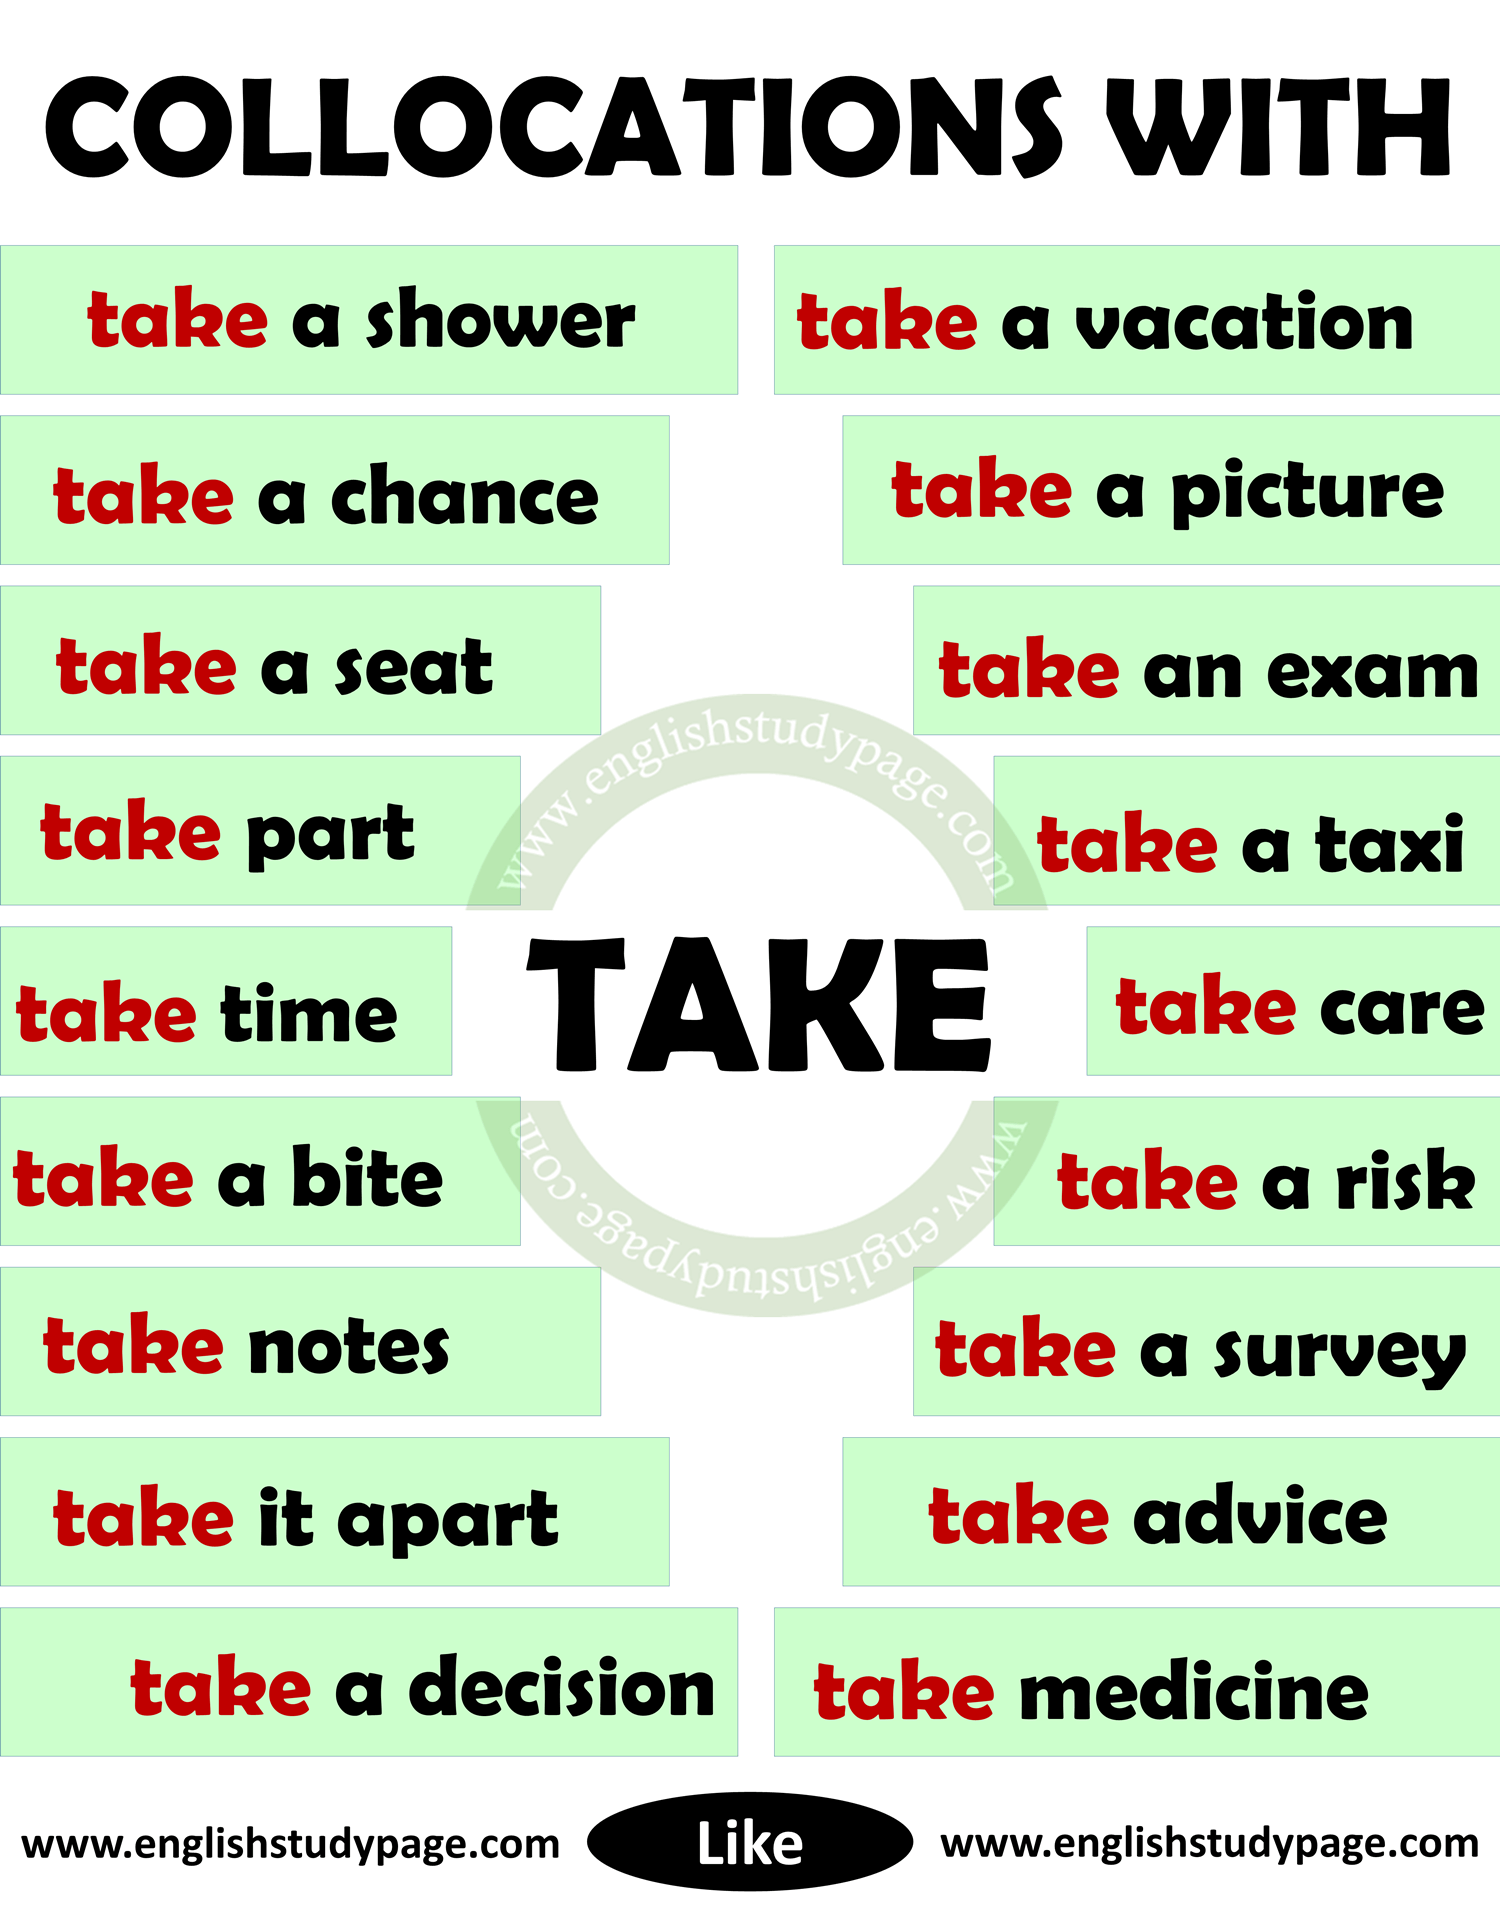 Collocations With TAKE in English